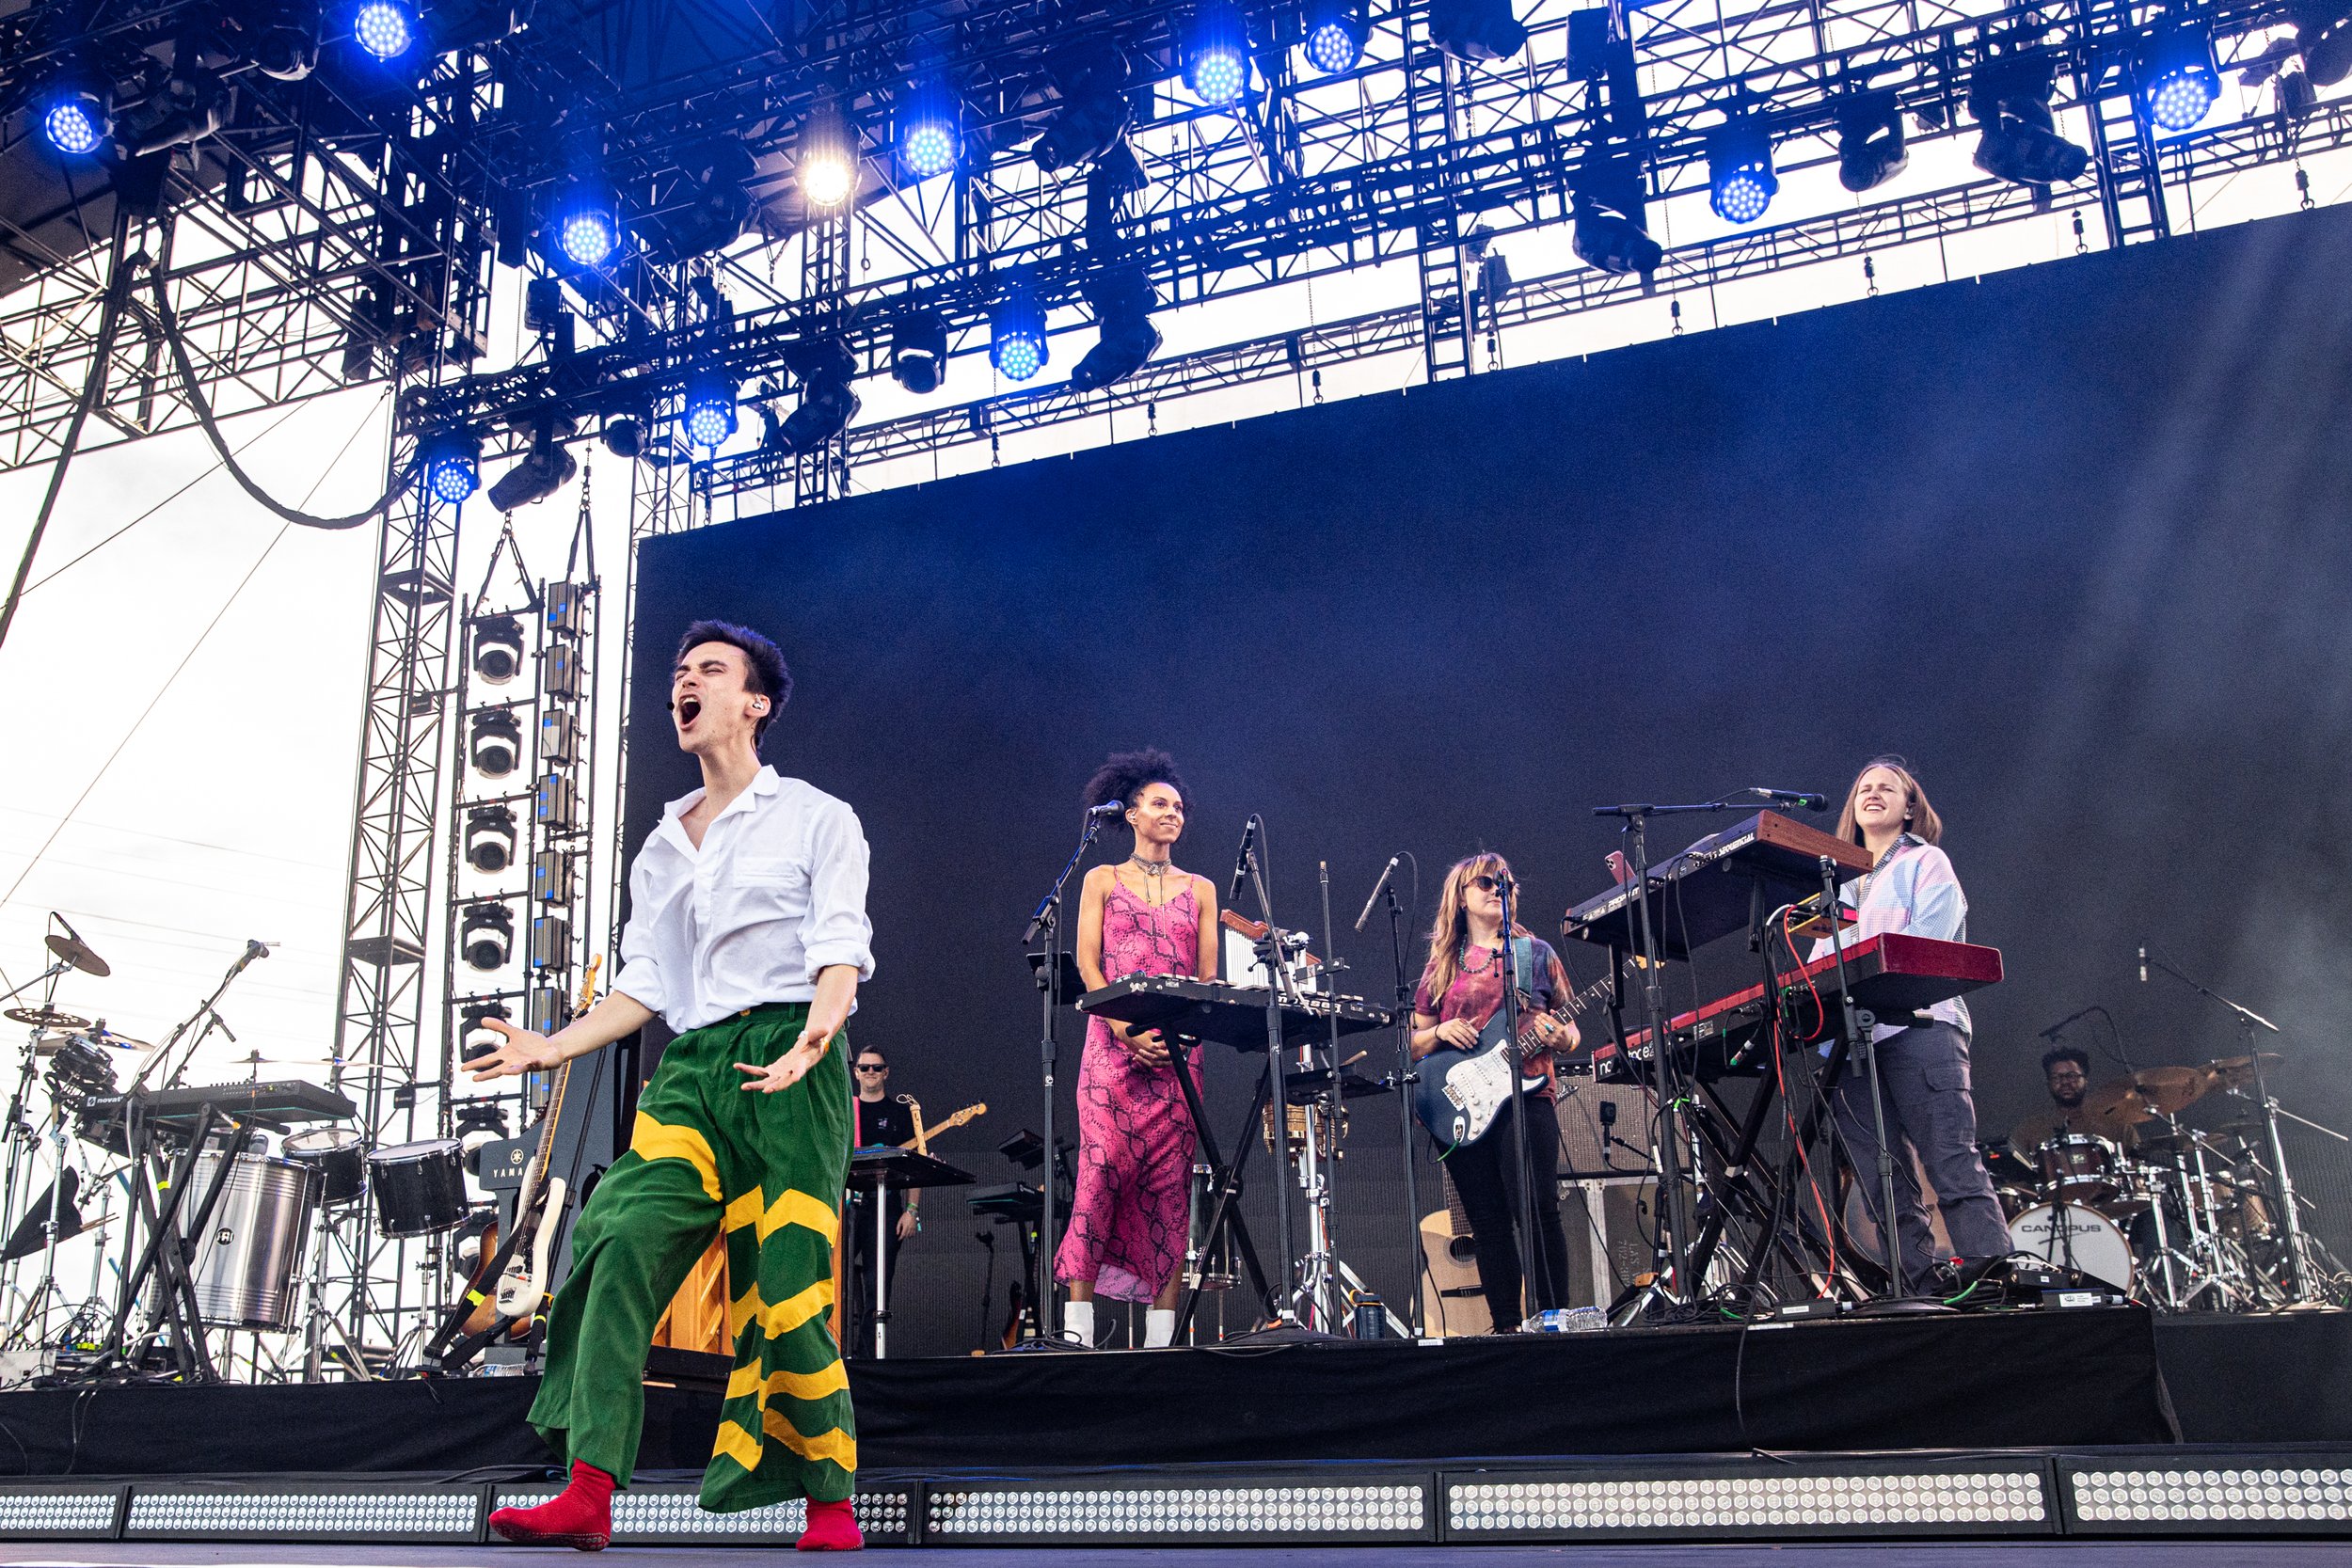 210919_JacobCollier_NancyDHuynh001.JPG